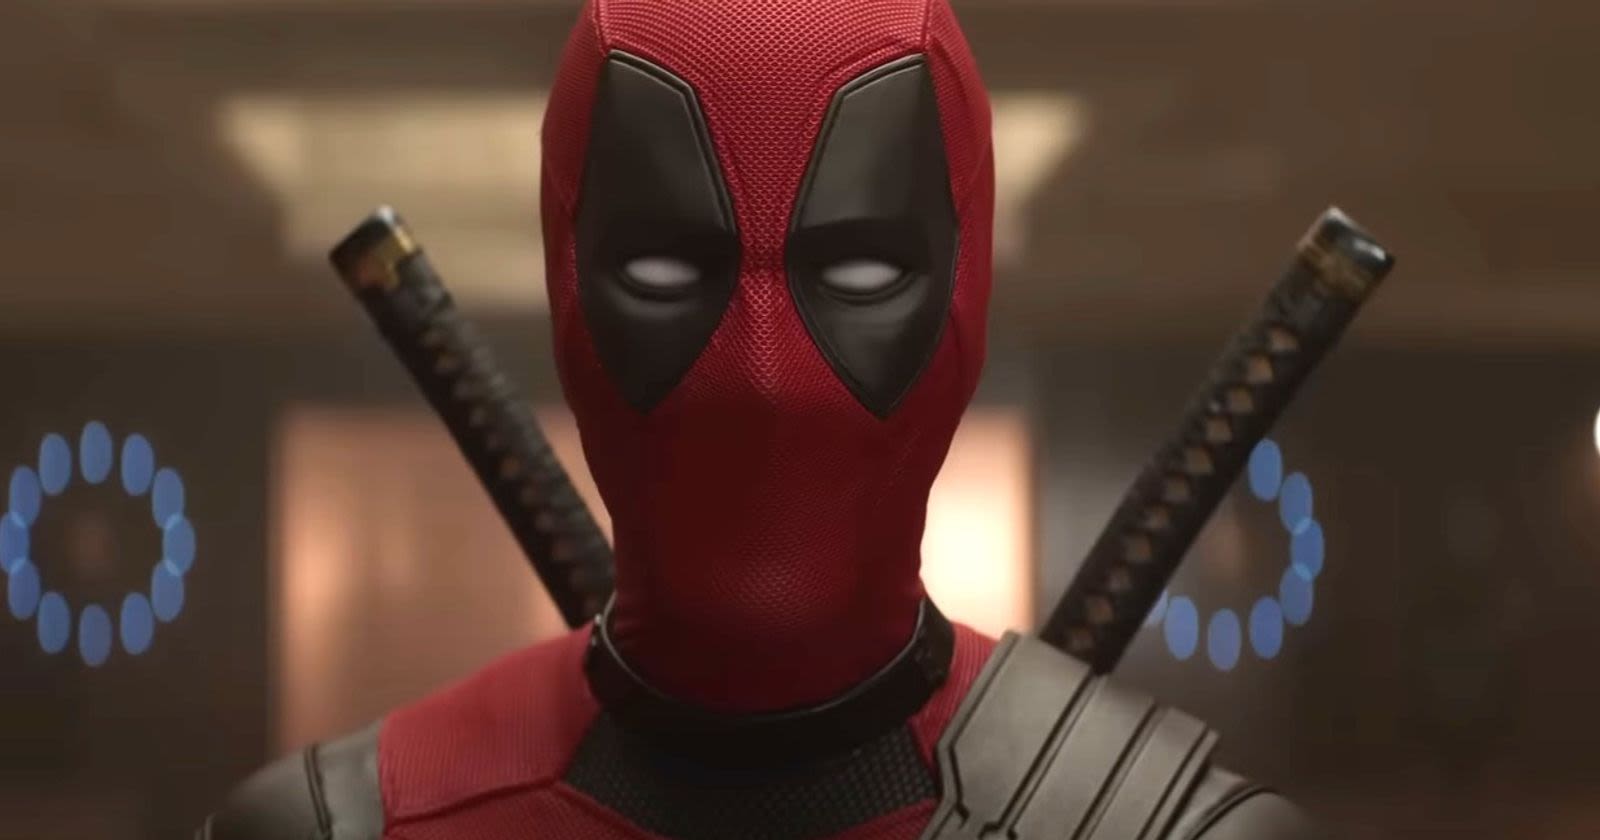 Deadpool and Wolverine Projected to Have Record-Breaking Opening Weekend Box Office